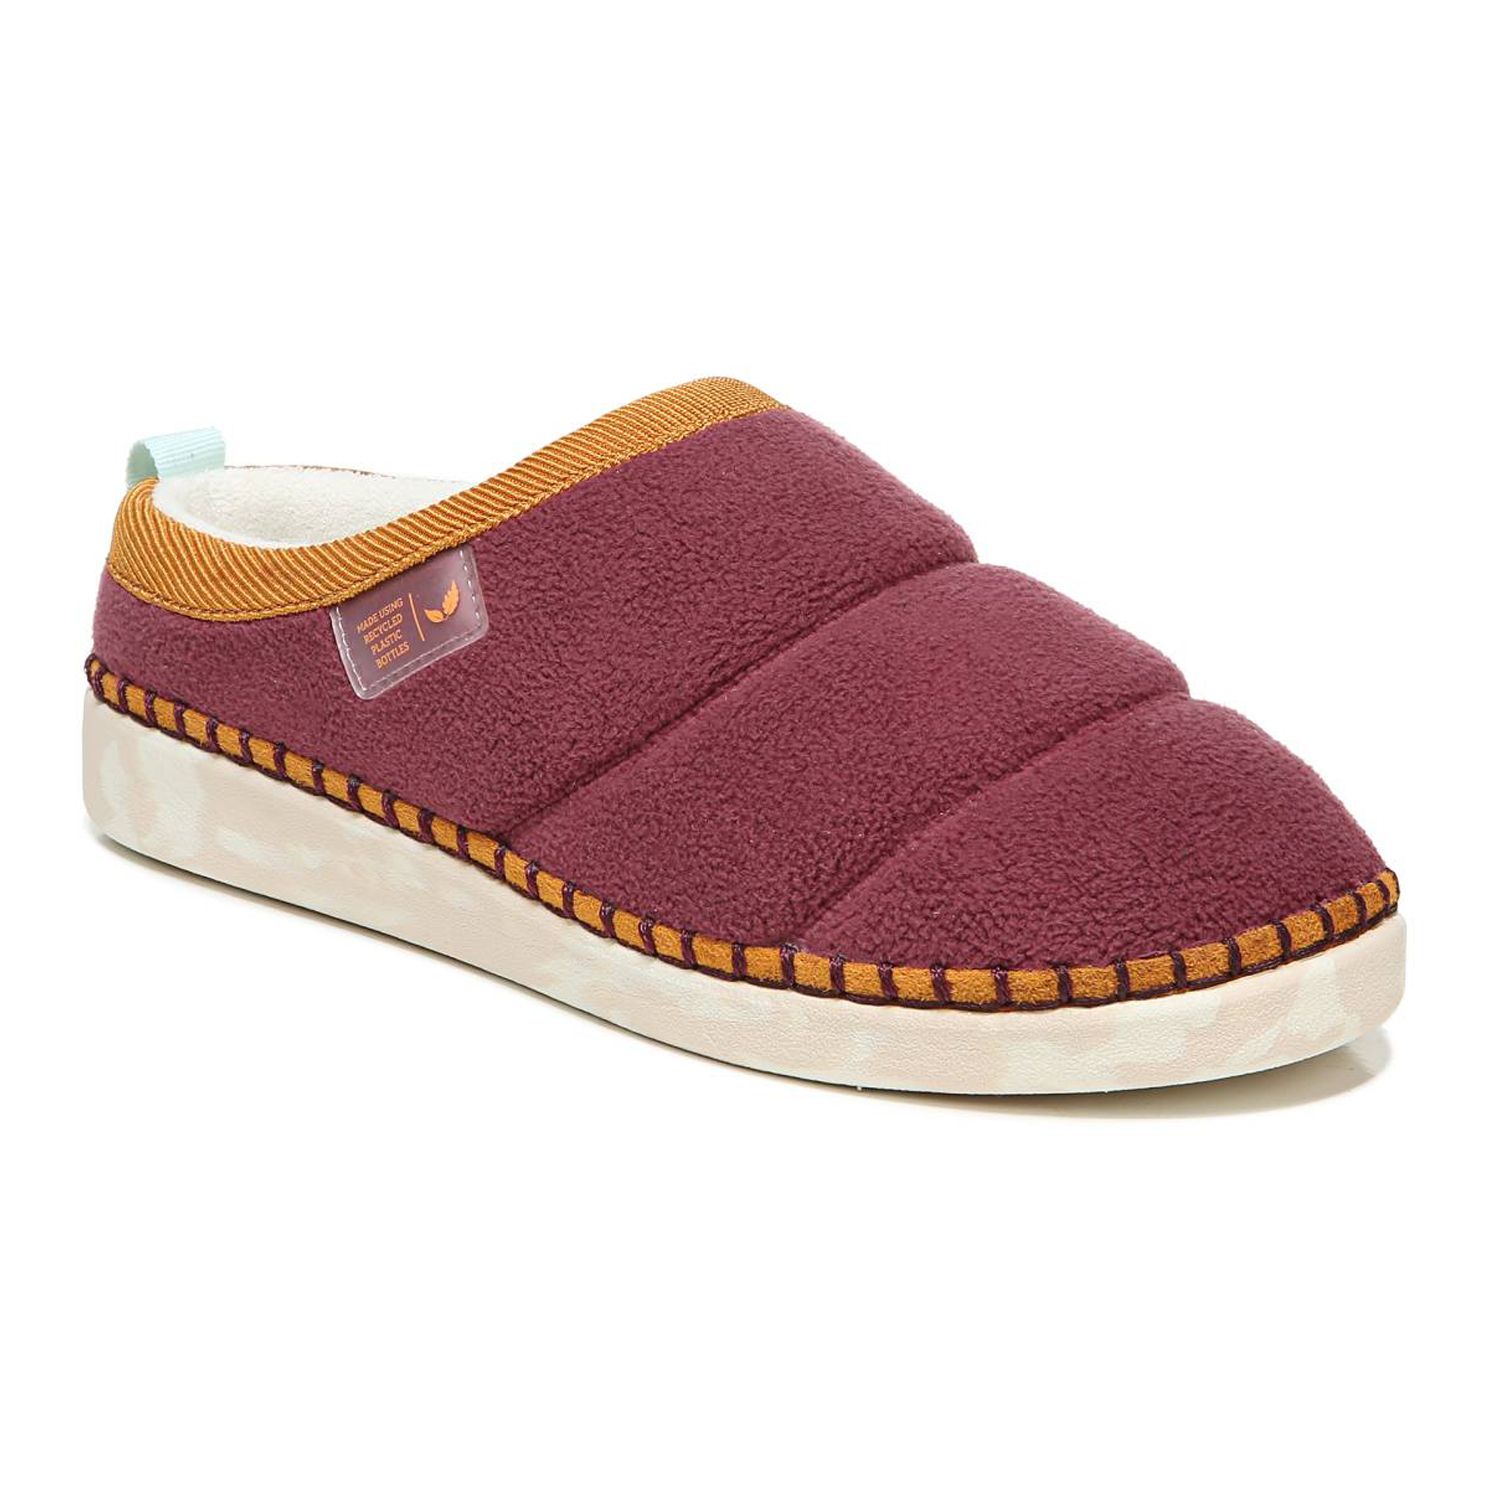 Image for Dr. Scholl's Cozy Vibes Women's Slippers at Kohl's.